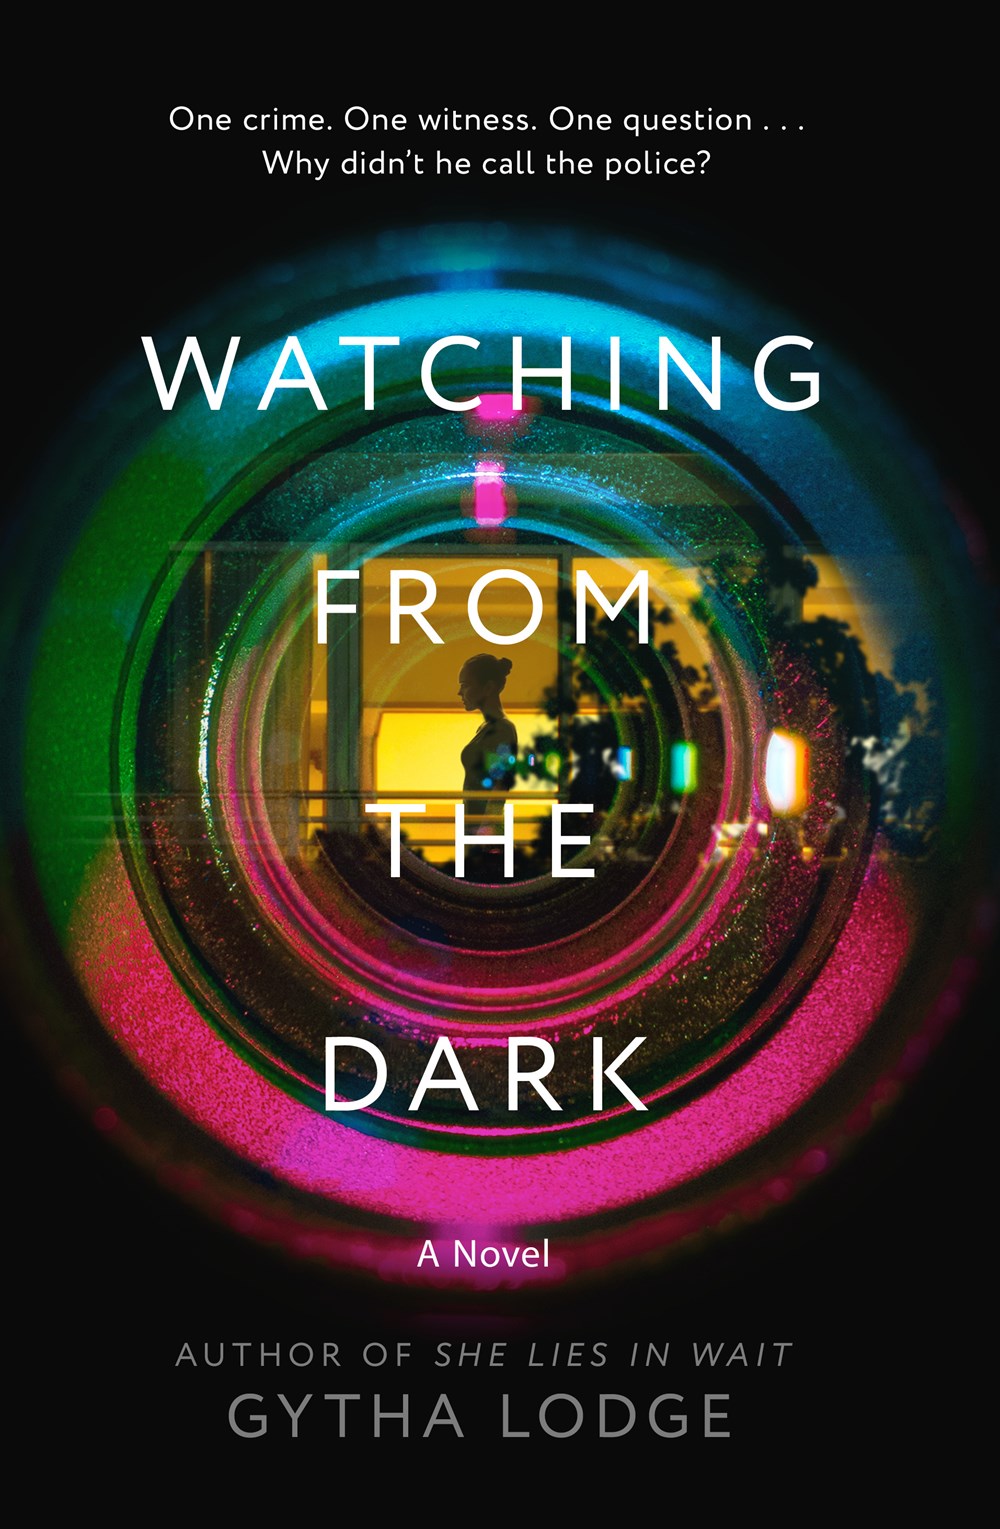 Review: Watching From the Dark by Gytha Lodge